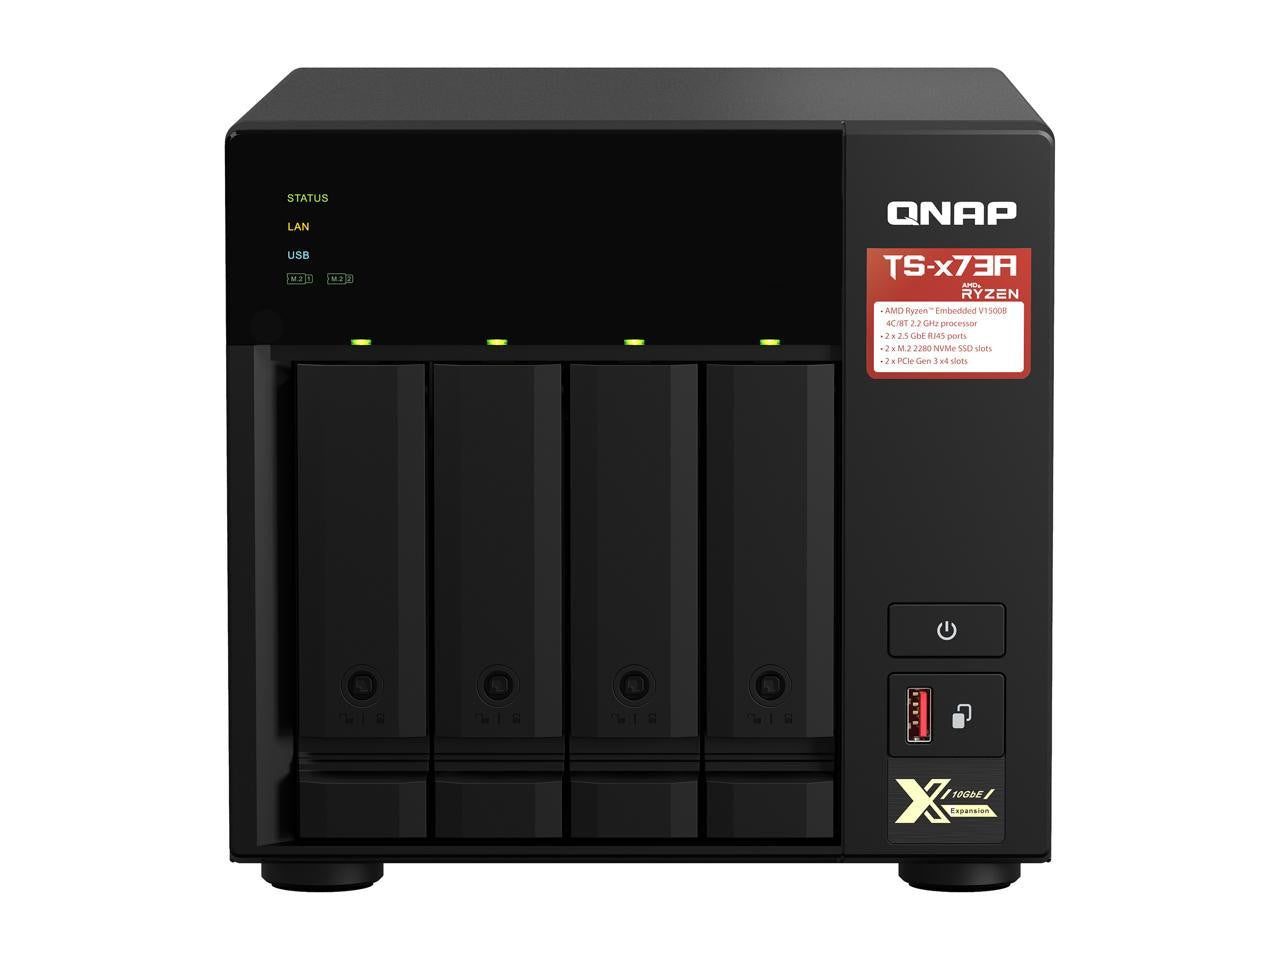 QNAP TS-473A 4-BAY NAS with 8GB DDR4 RAM and 16TB (4x4TB) Western Digital RED PLUS Drives Fully Assembled and Tested